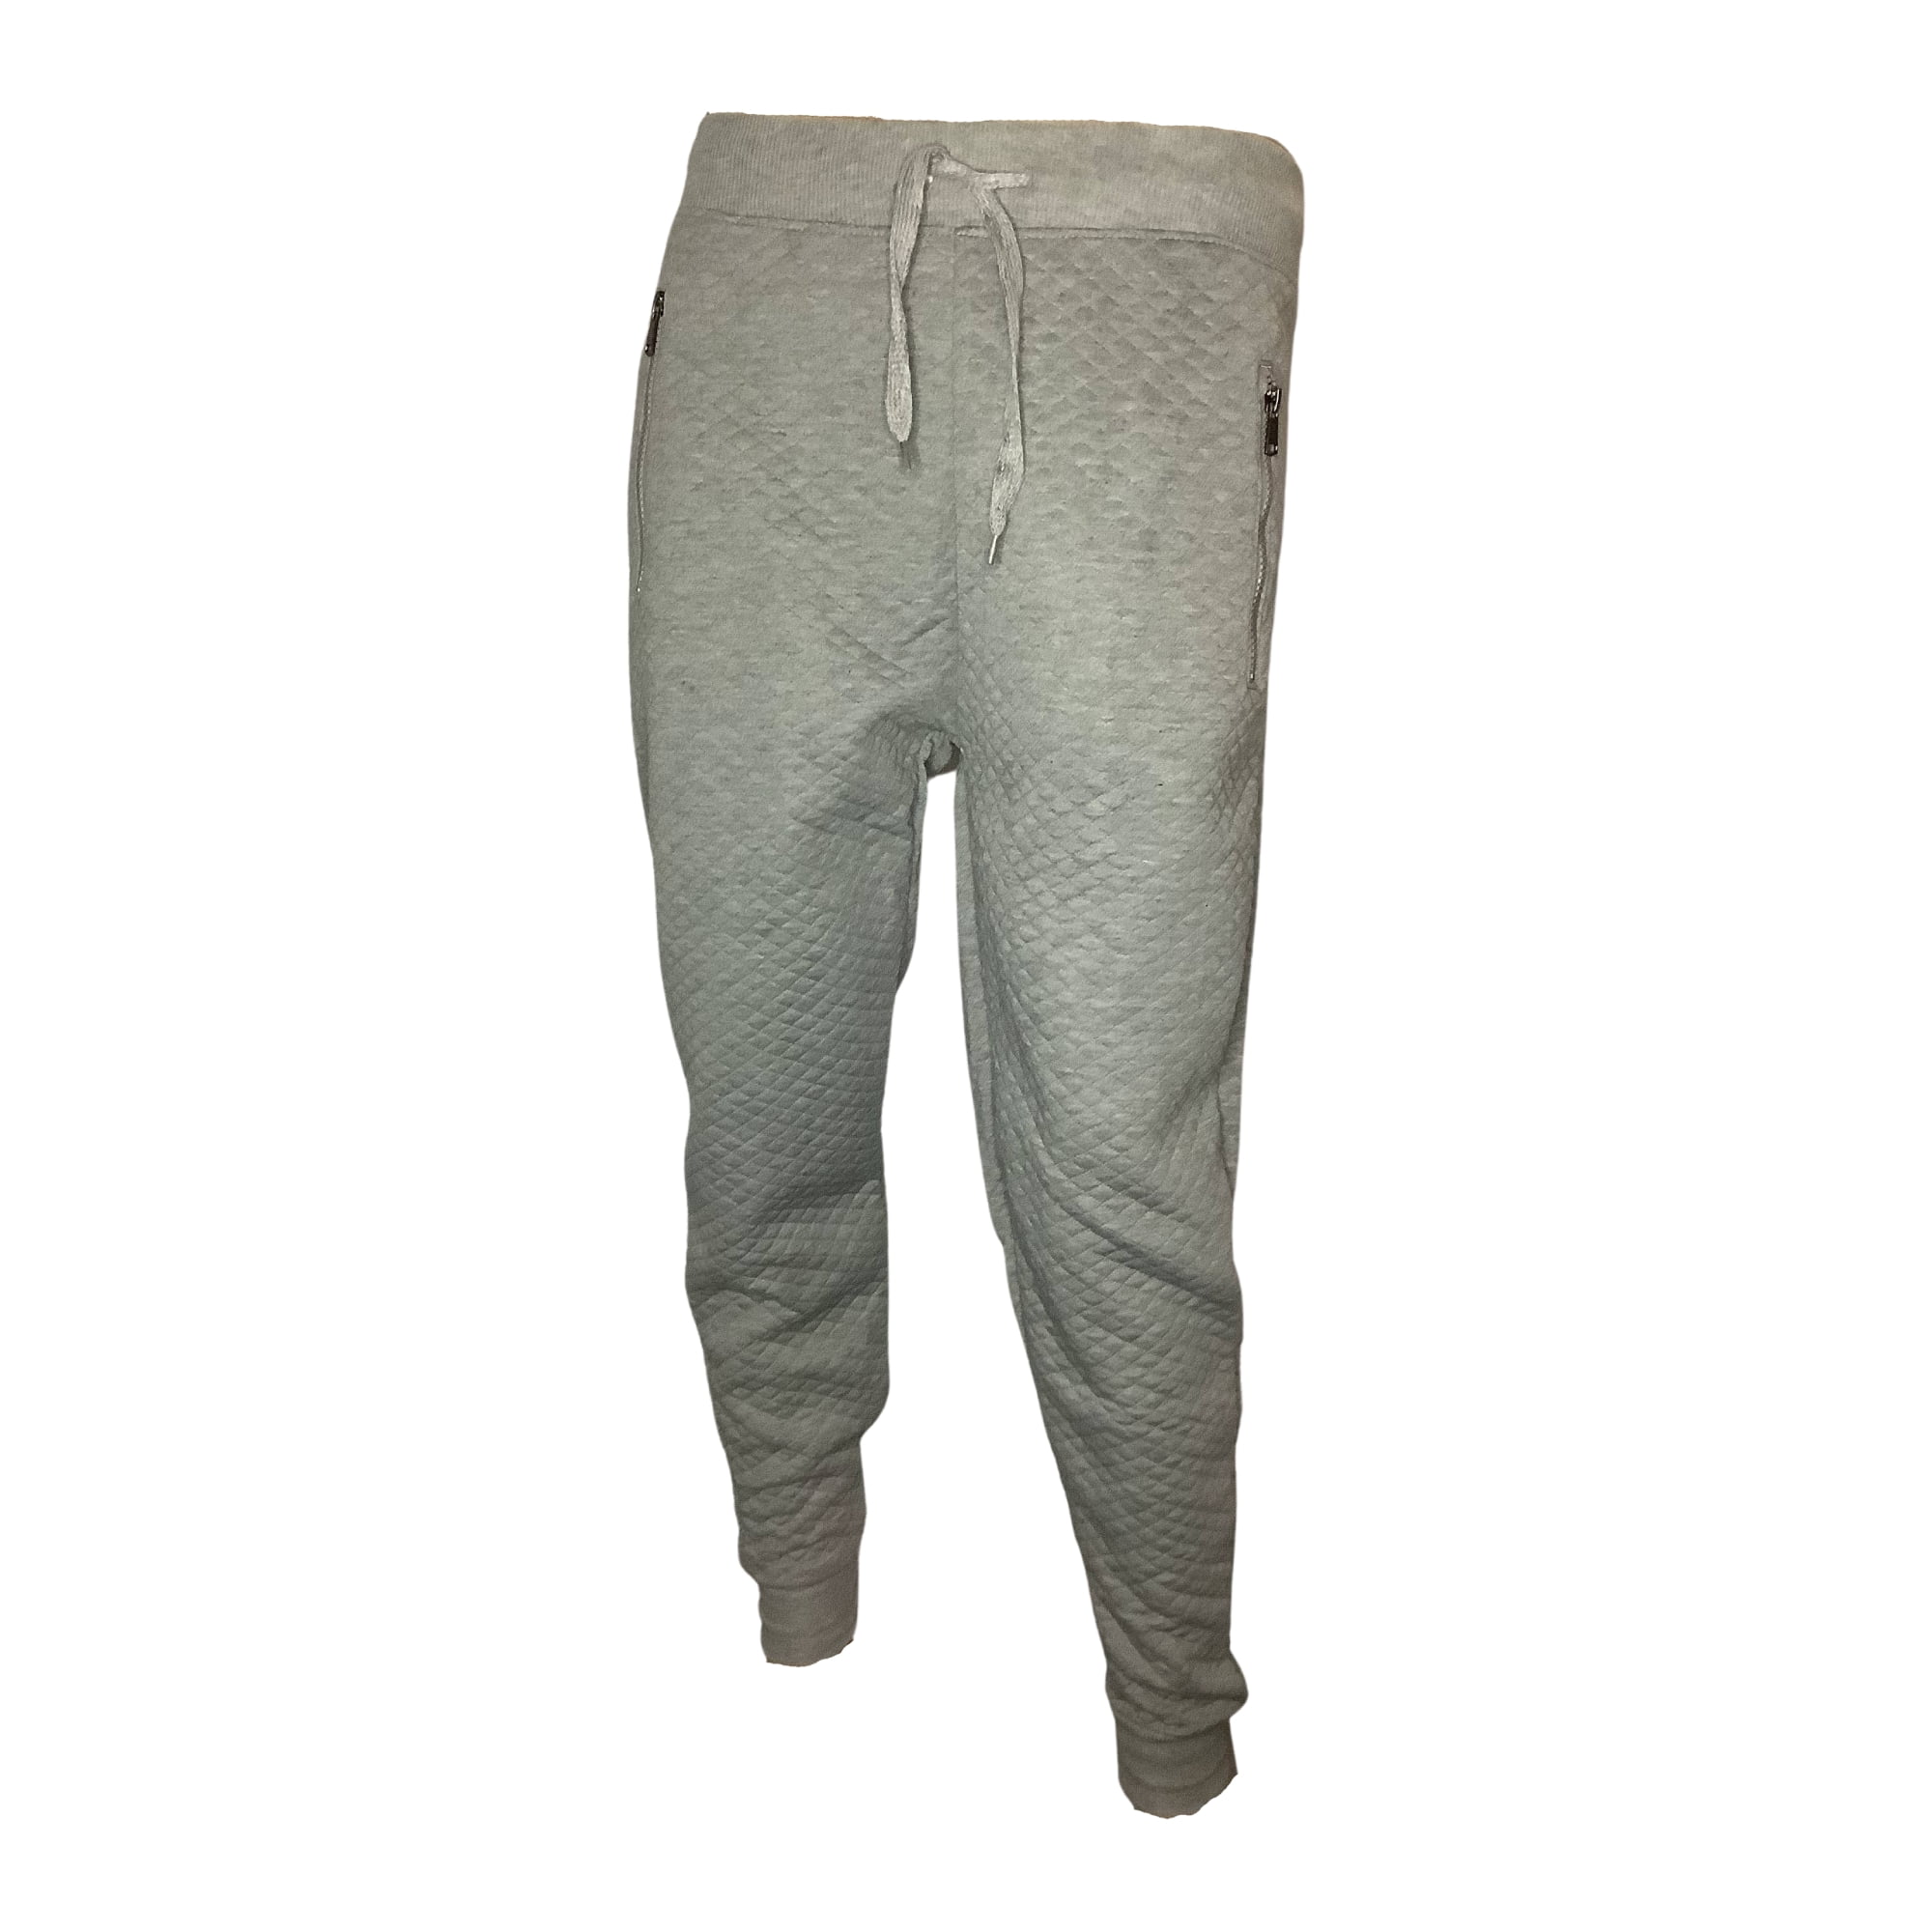 Joggers With Zipper Bottoms Waistband Tracksuit Trousers Pants Sizes 8-18 FT2731 